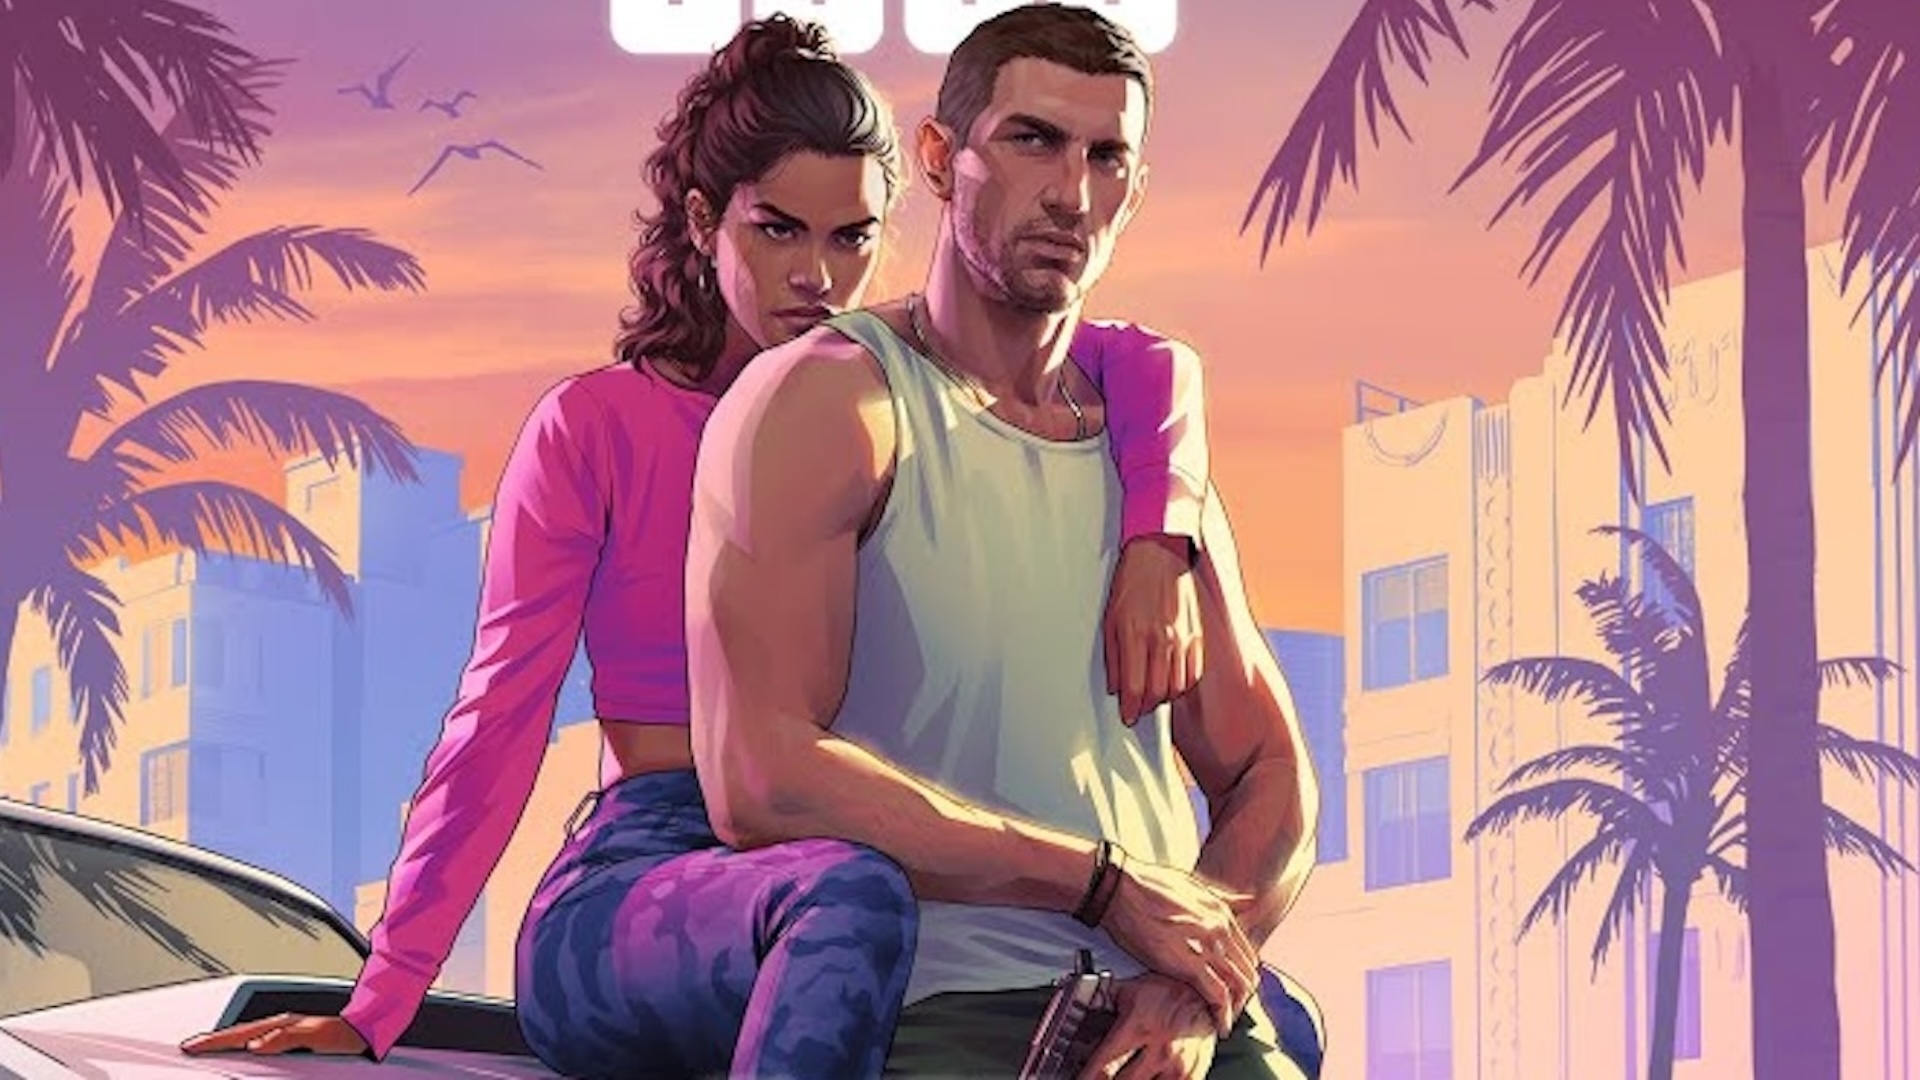 Grand Theft Auto 6 officially announced by Rockstar Games